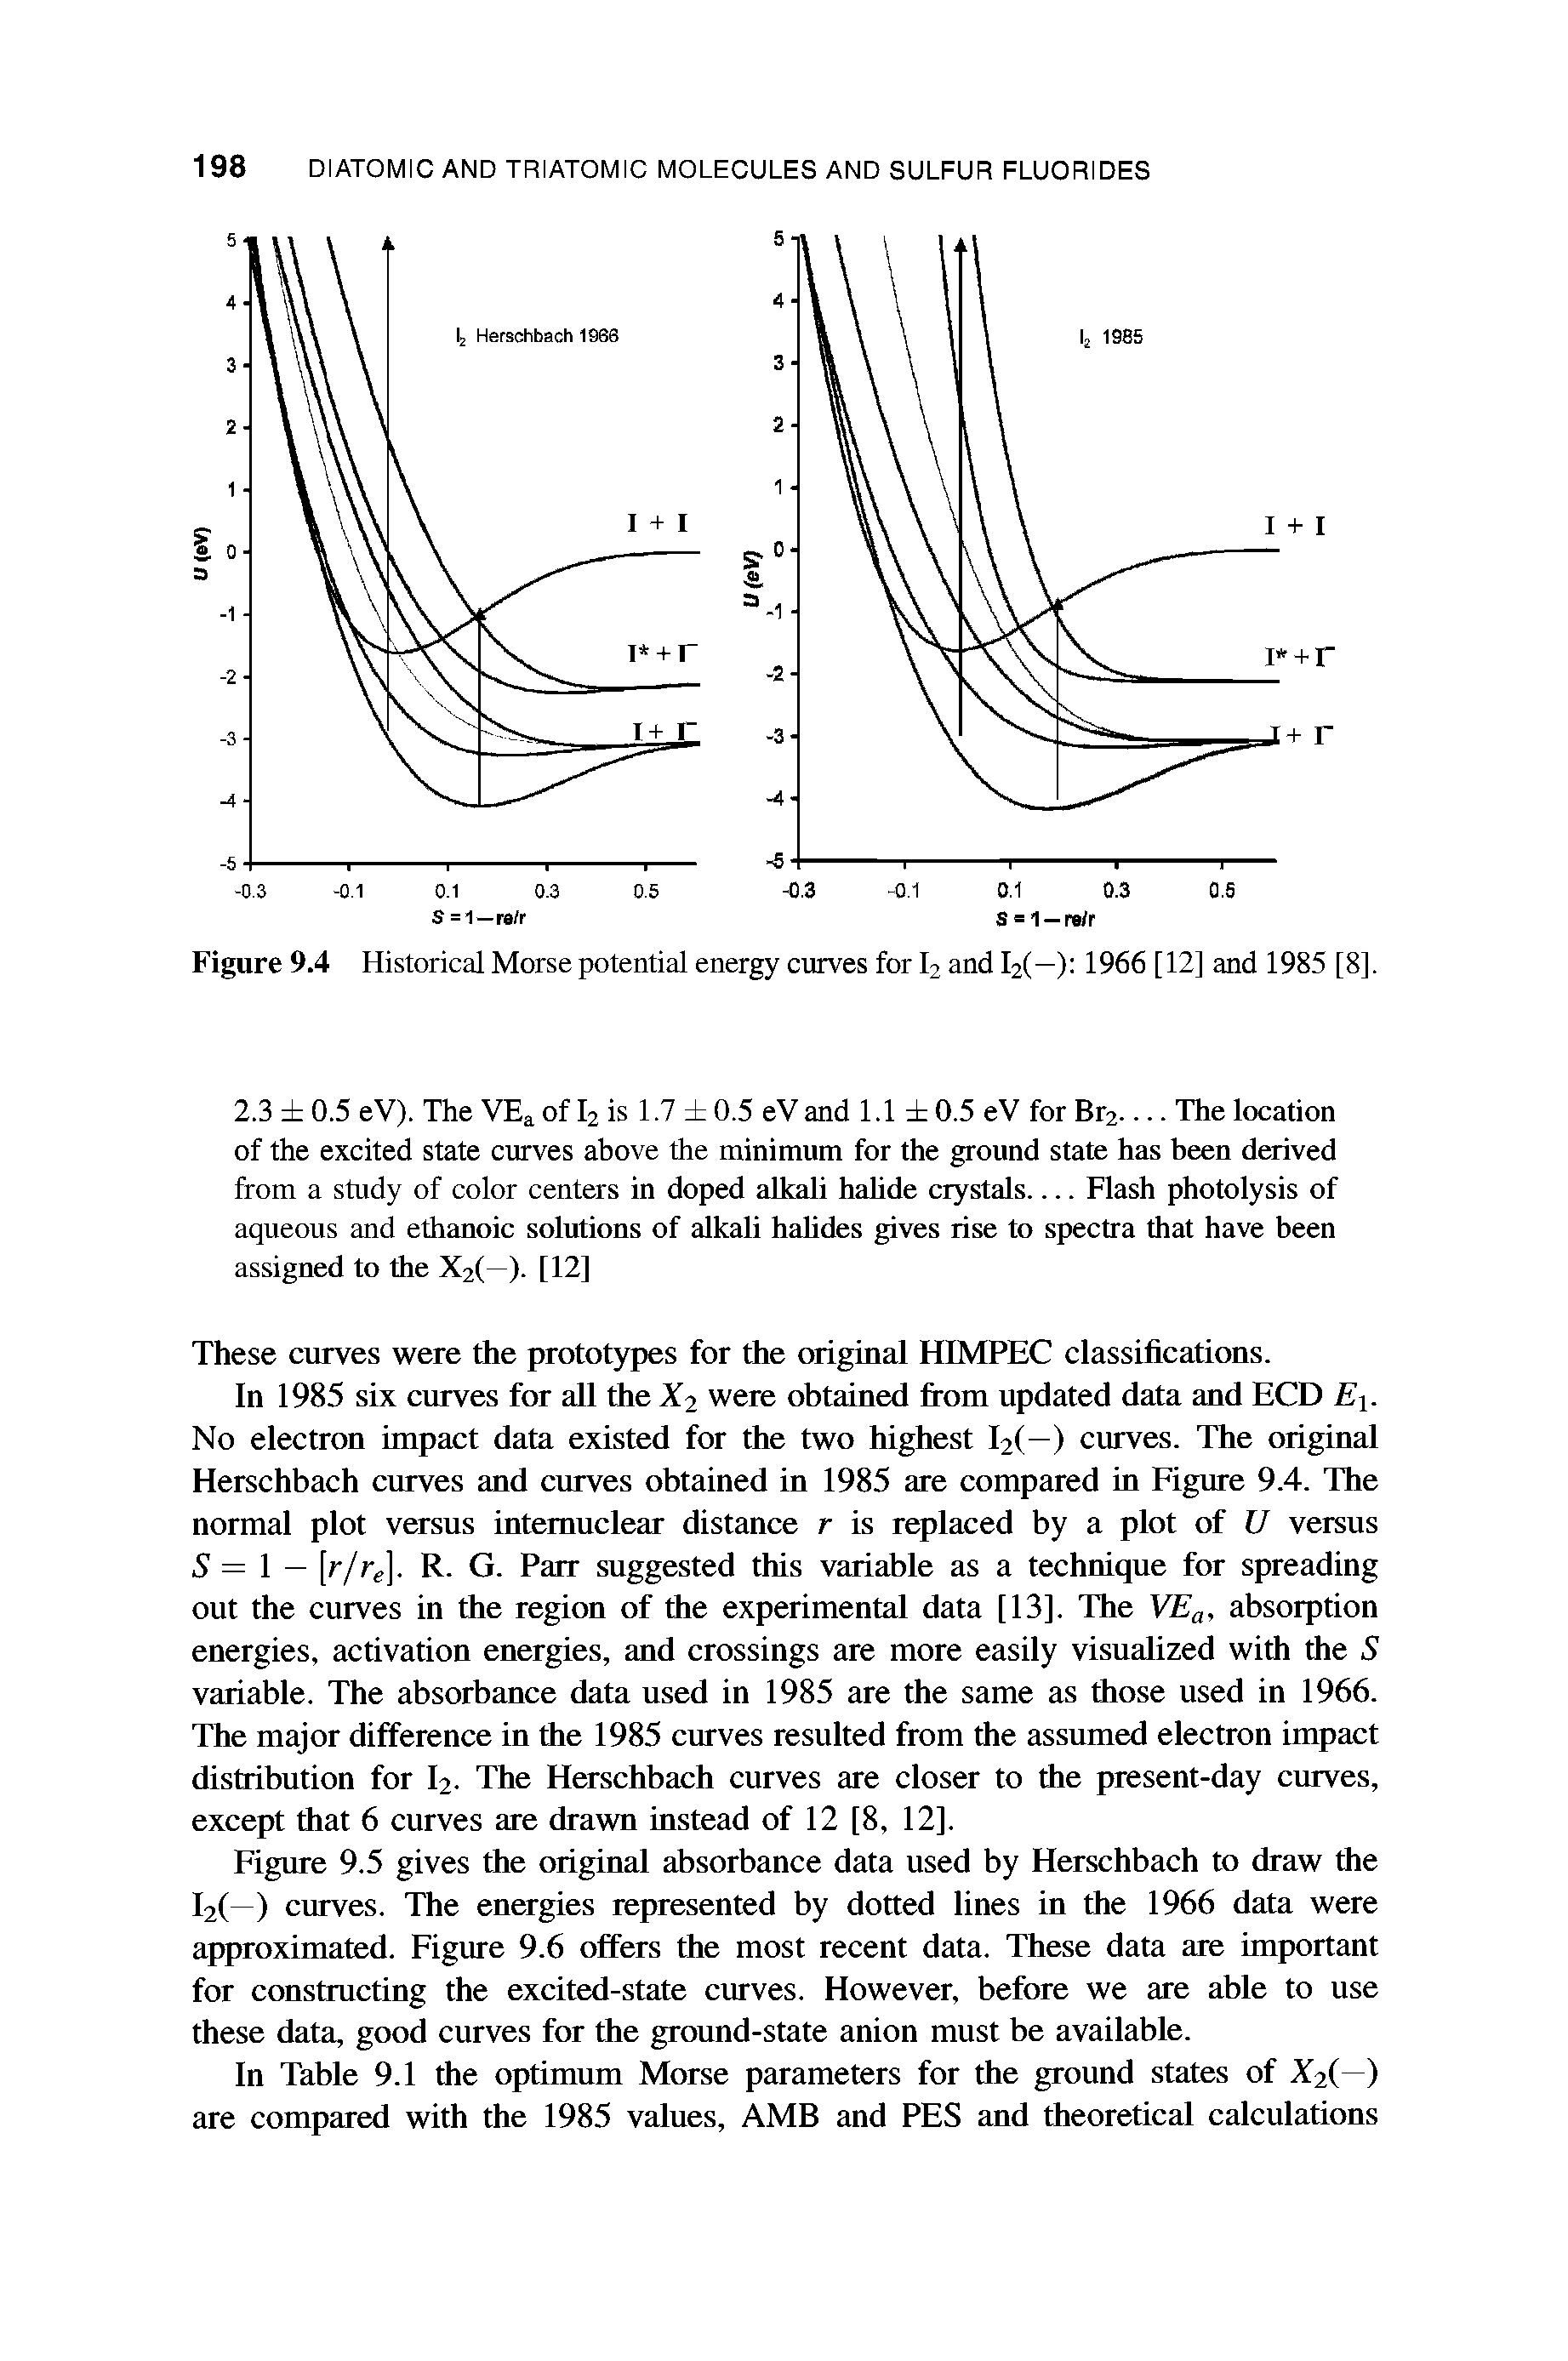 Figure 9.4 Historical Morse potential energy curves for I2 and I2(—) 1966 [12] and 1985 [8],...